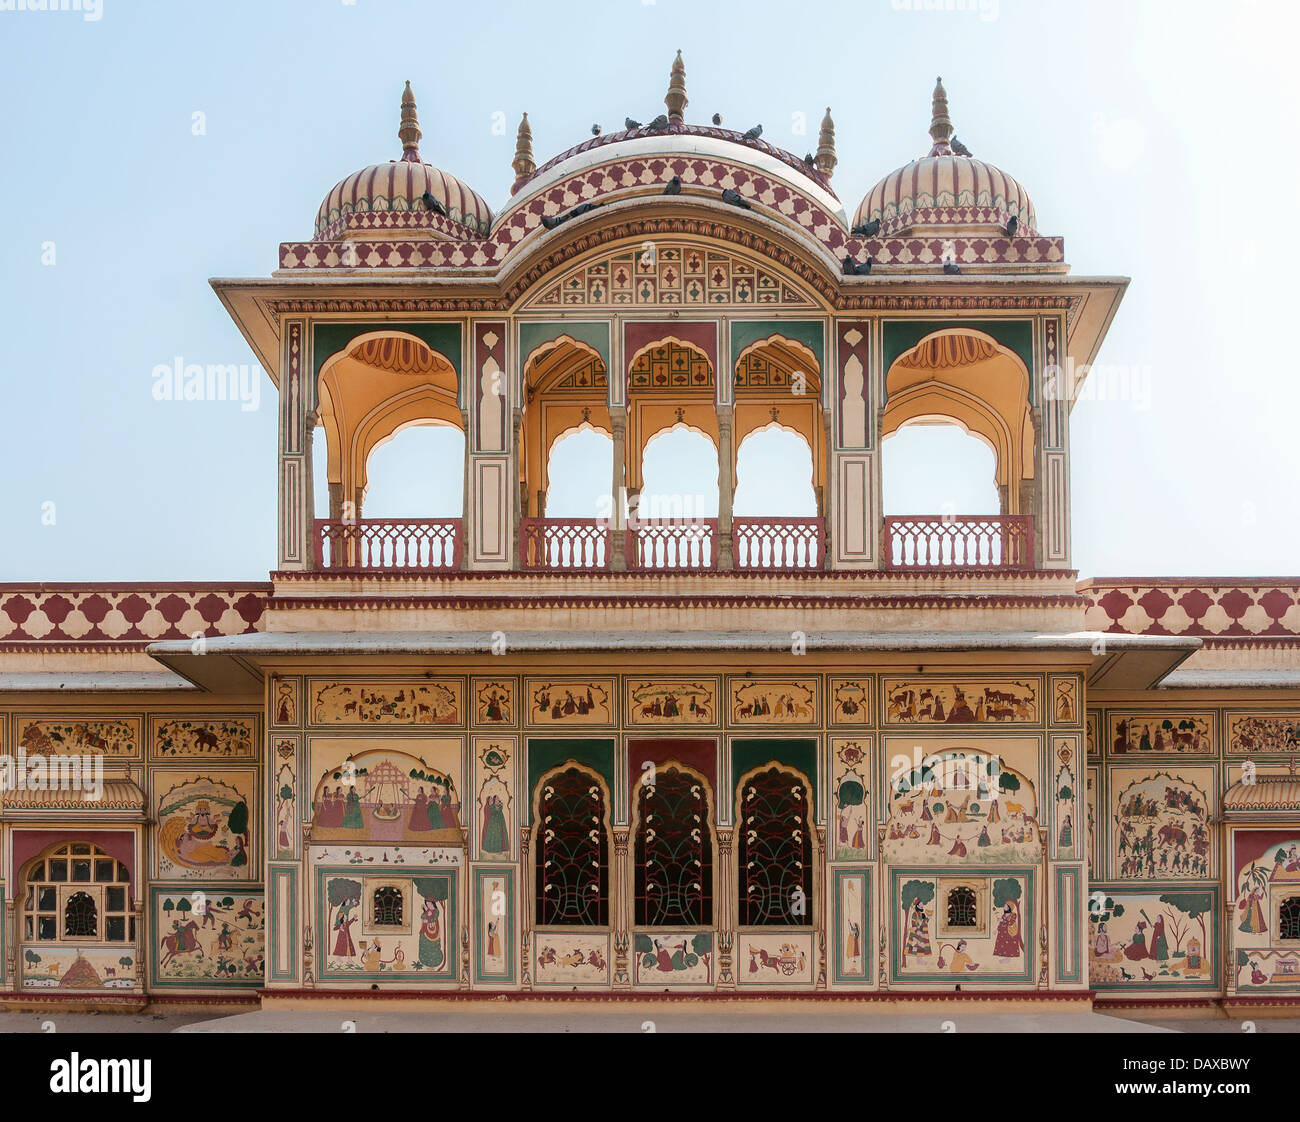 Domed upper structure with wall paintings on mansion outside India's Jaipur. Stock Photo